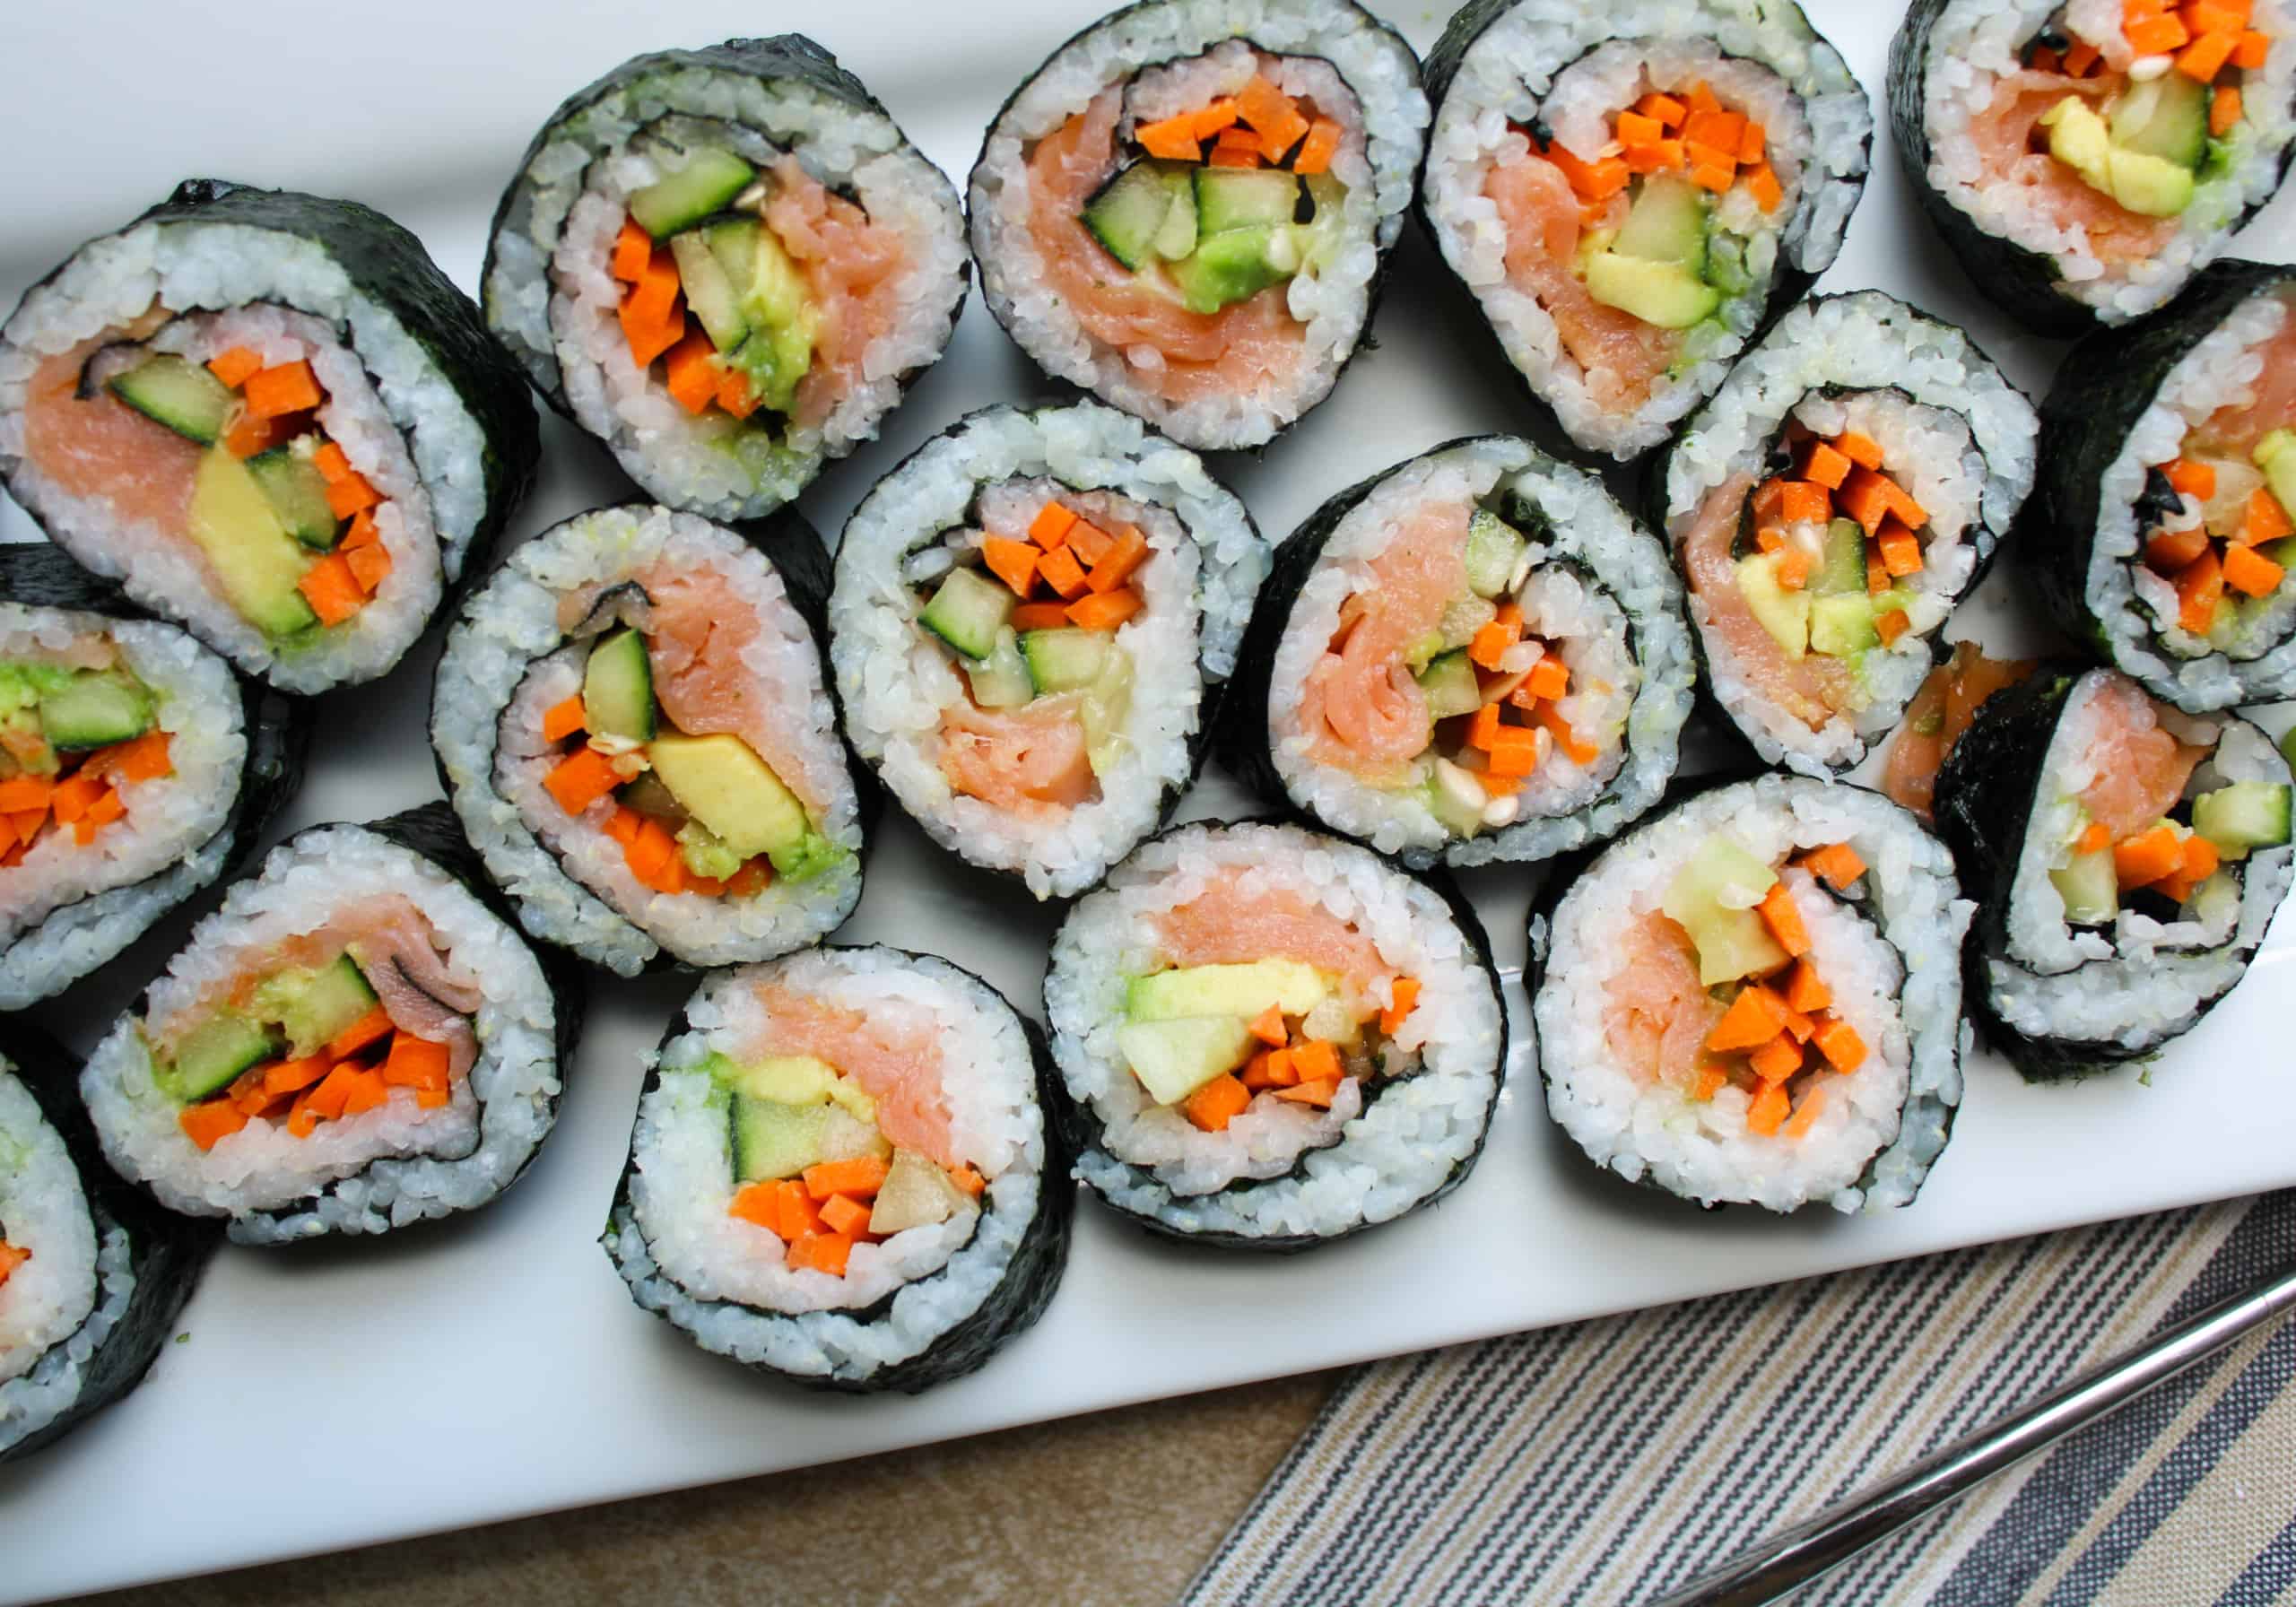 Step-by-step: How to make your own sushi rolls